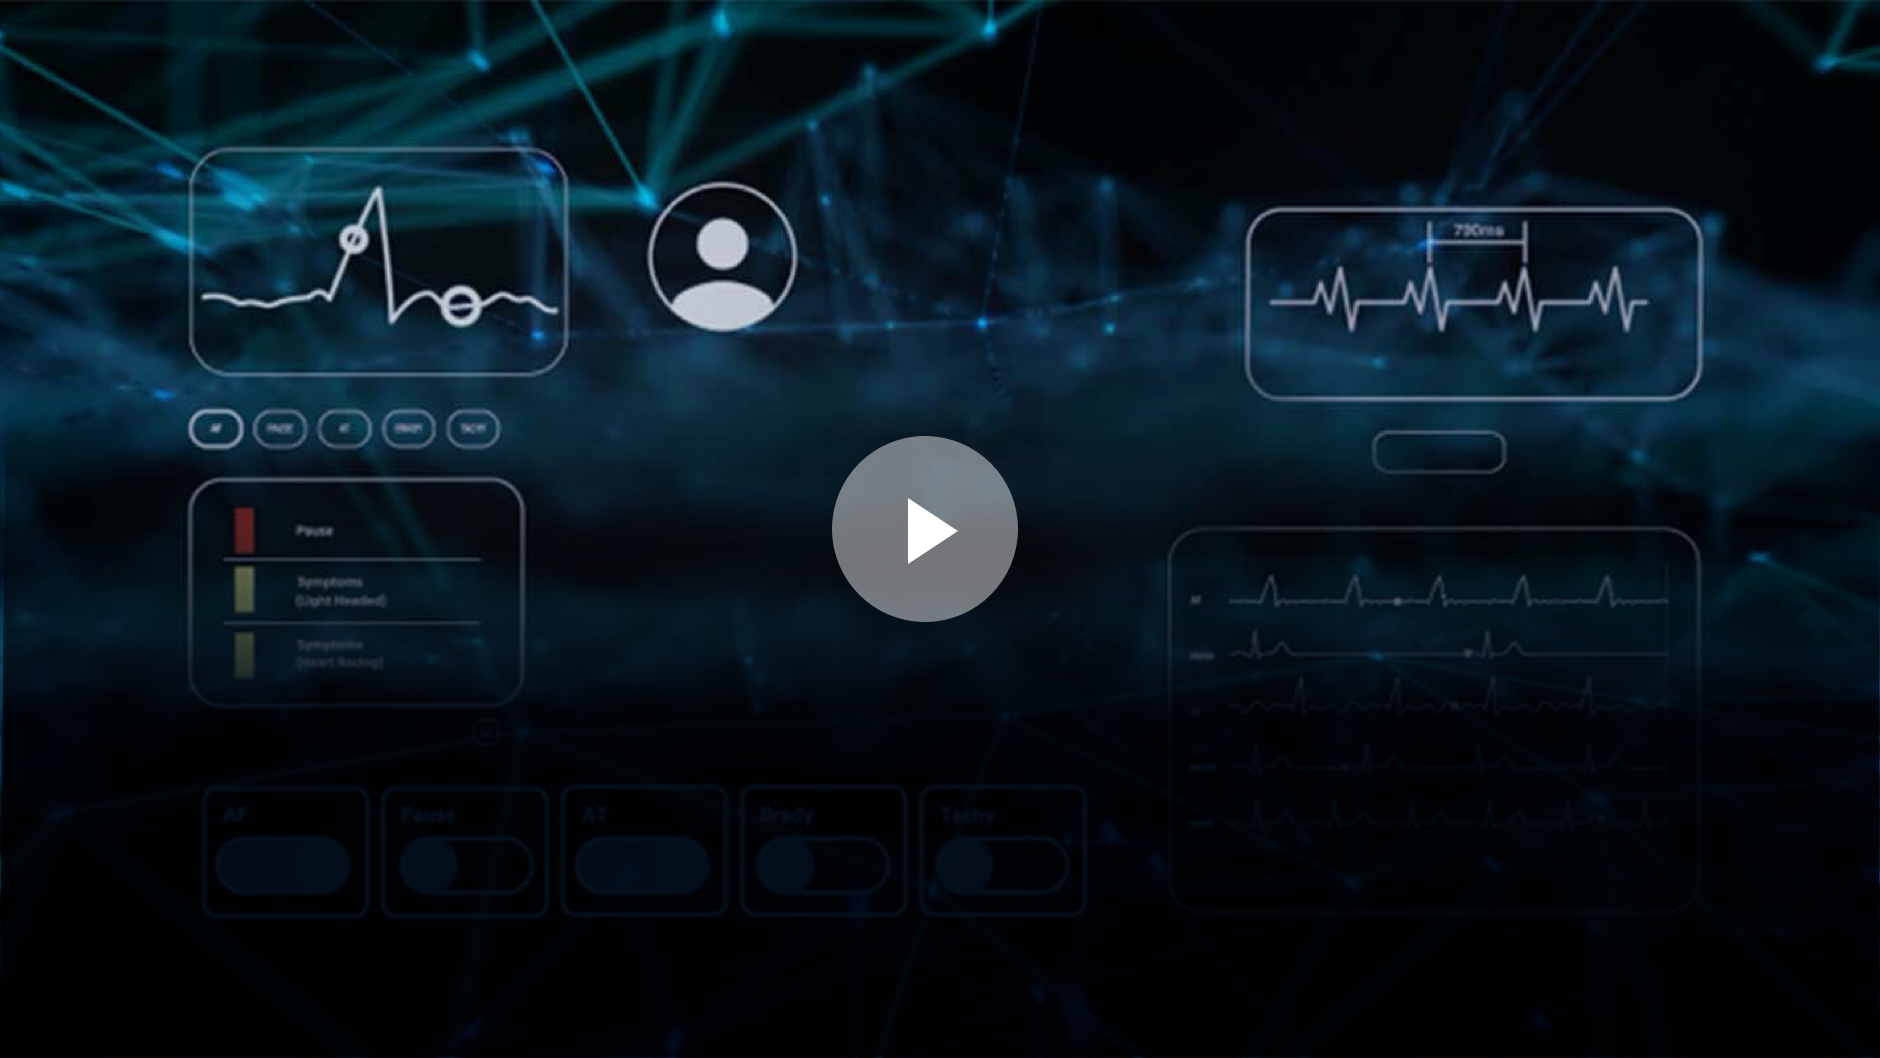 Video image with "Actionable insights. Fast diagnosis. Find out how the LUX-Dx ICM dual-stage algorithm rejects false positives to maximize your time. Plus, see performance results across multiple cardiac arrythmias."